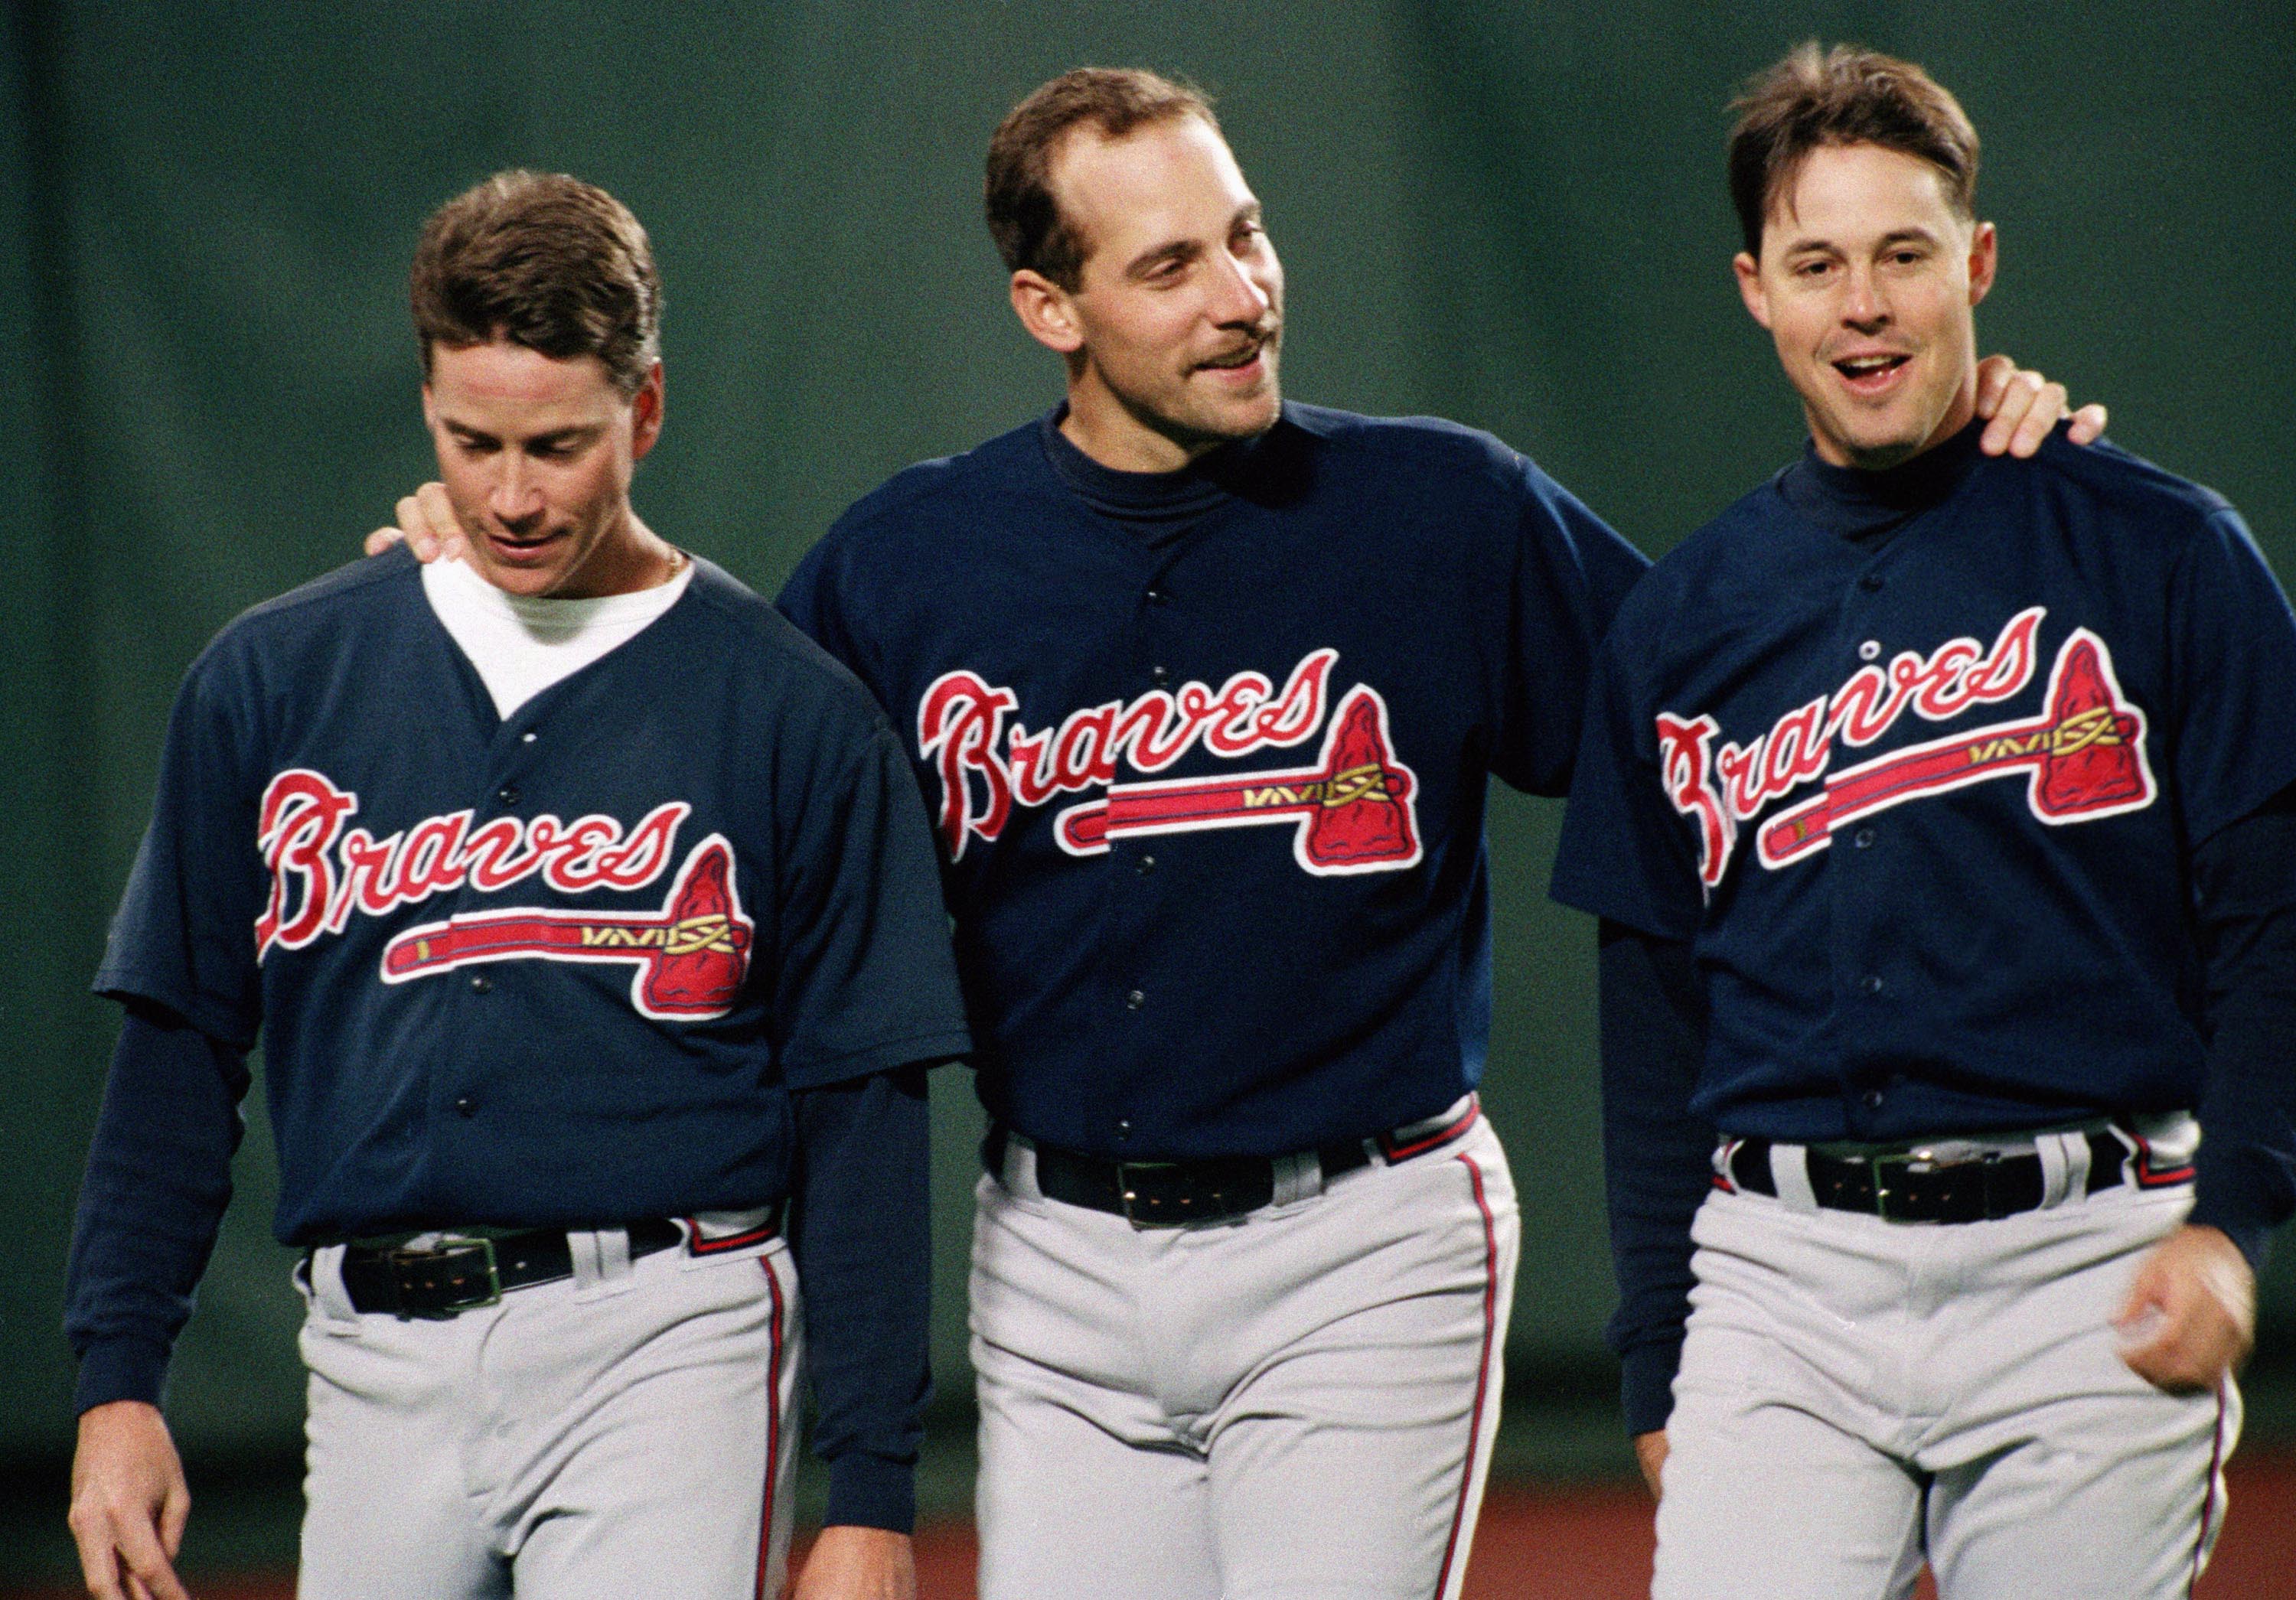 Ended 16 Years of Married Life; Who John Smoltz Current Wife?